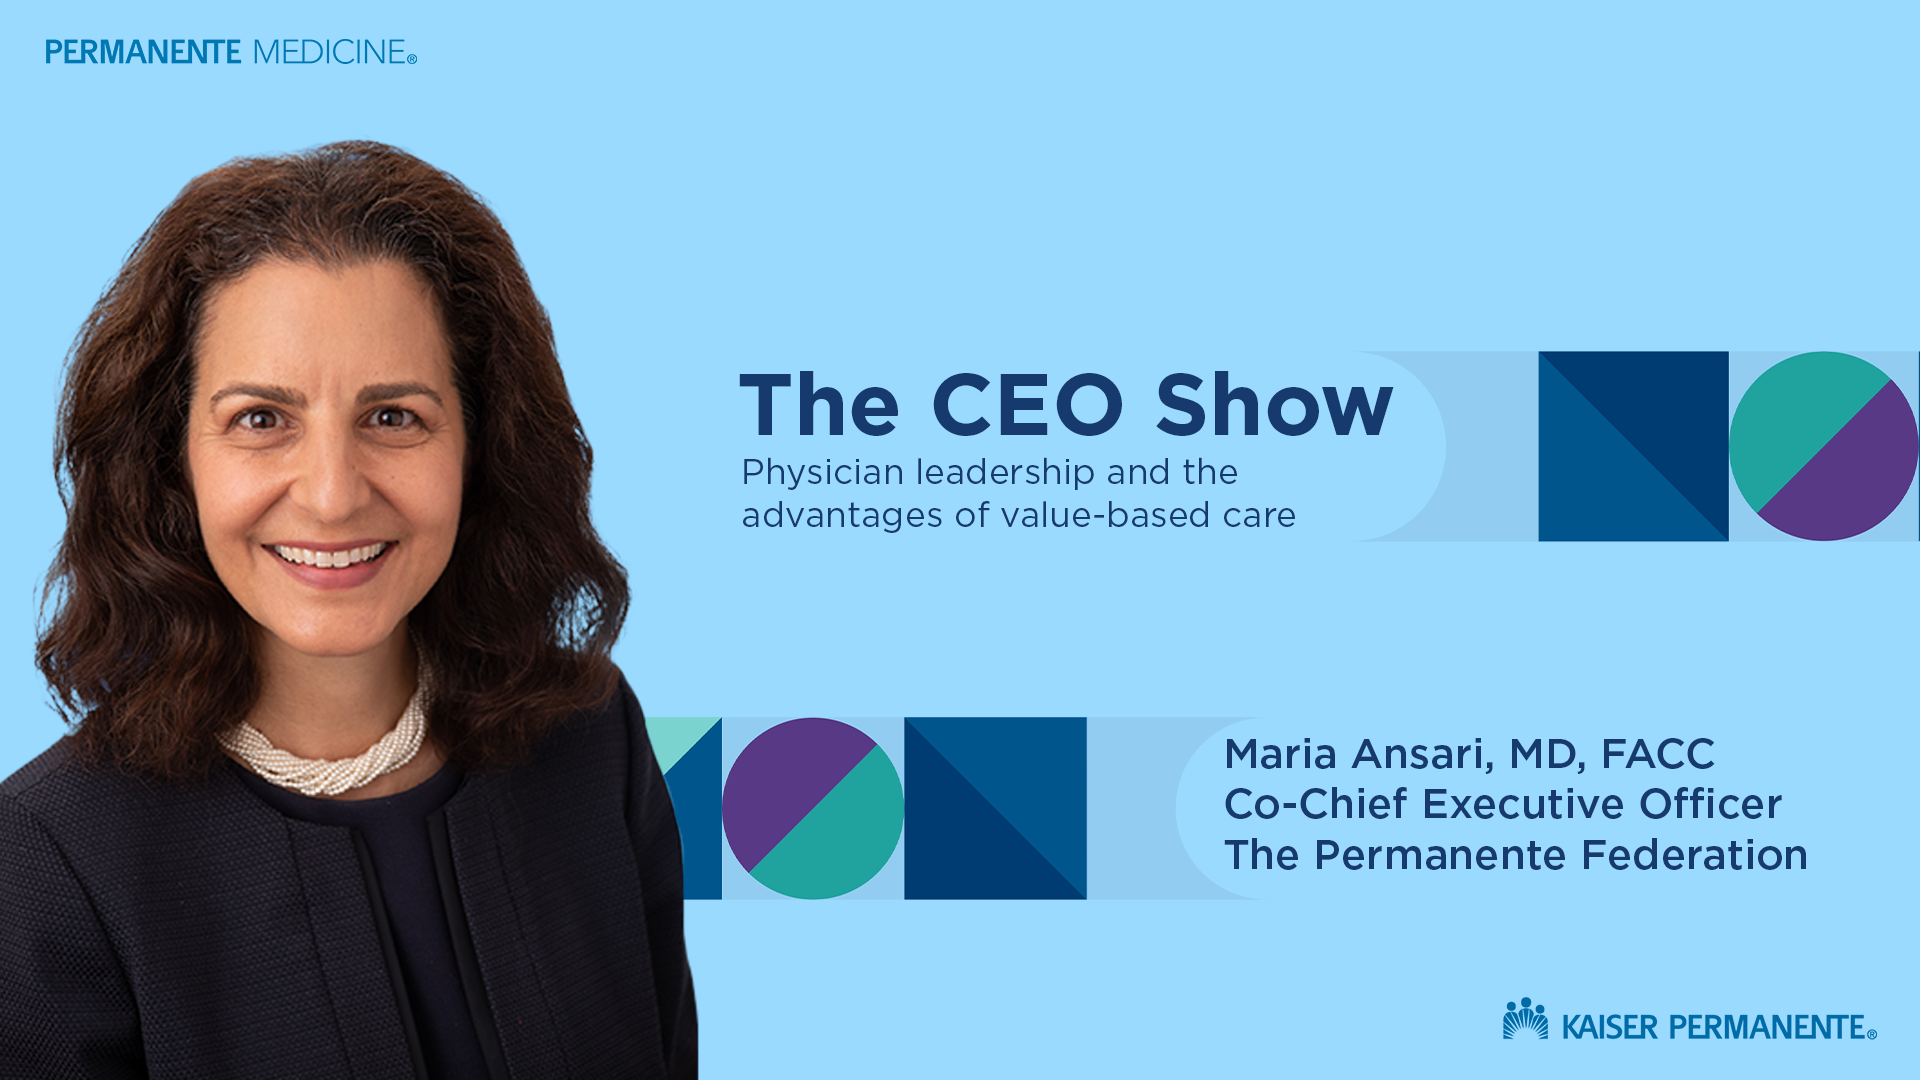 Dr. Ansari shares keys to leading in a value-based care organization